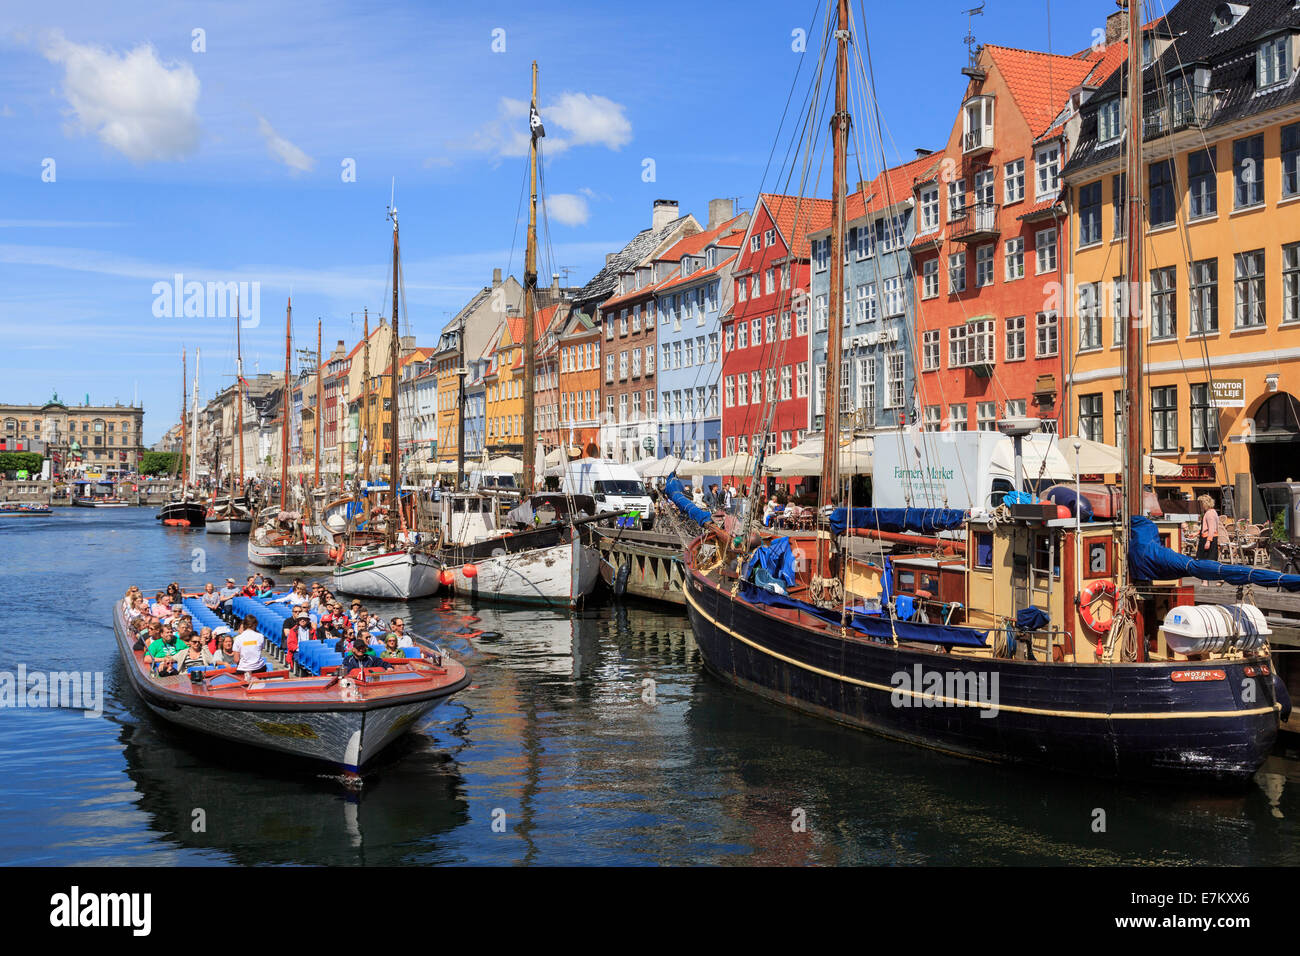 Tourists on Copenhagen canal tour boat with old boats moored in front of colourful buildings. Nyhavn Copenhagen Zealand Denmark Scandinavia Stock Photo